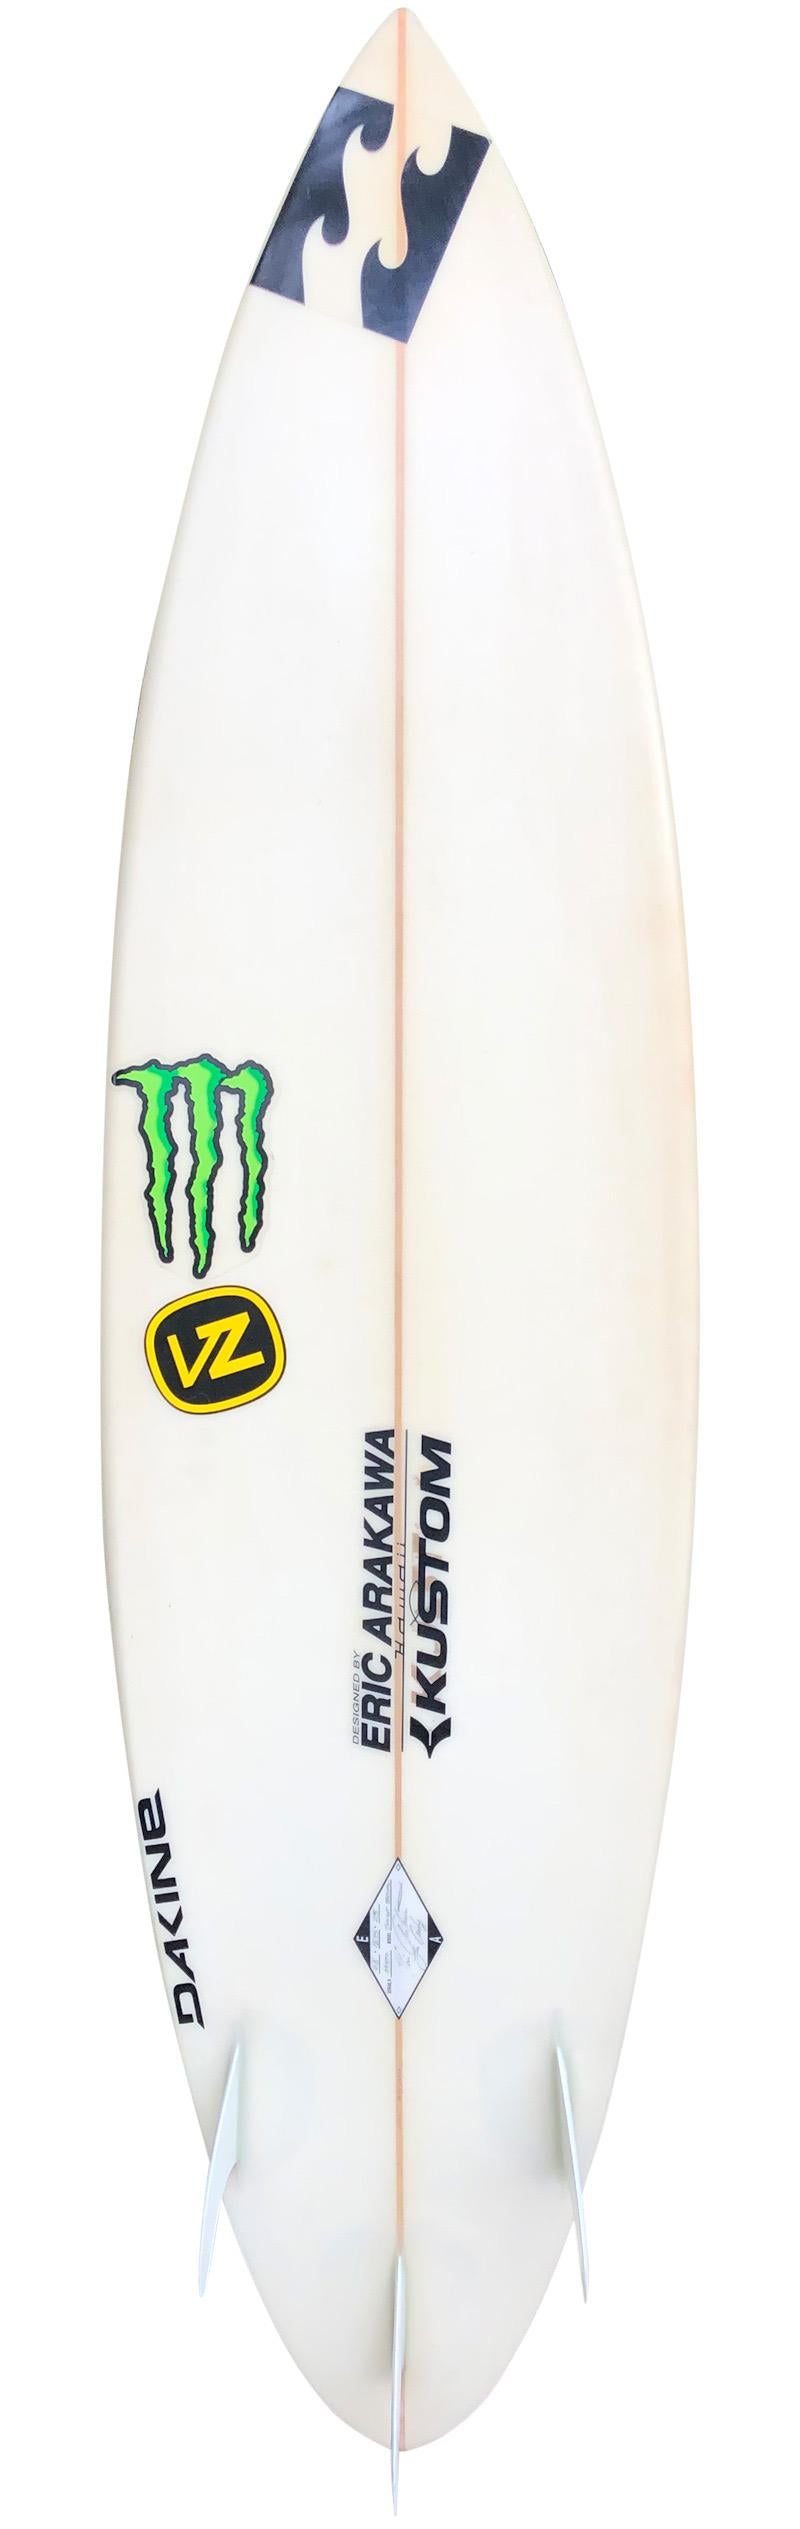 2009 Andy Irons personal Sunset Beach big wave surfboard made by Eric Arakawa. Shaped as a “Sunset Special” made specifically to be ridden at the world famous waves of Sunset Beach, site of the annual Triple Crown of Surfing. This board previously